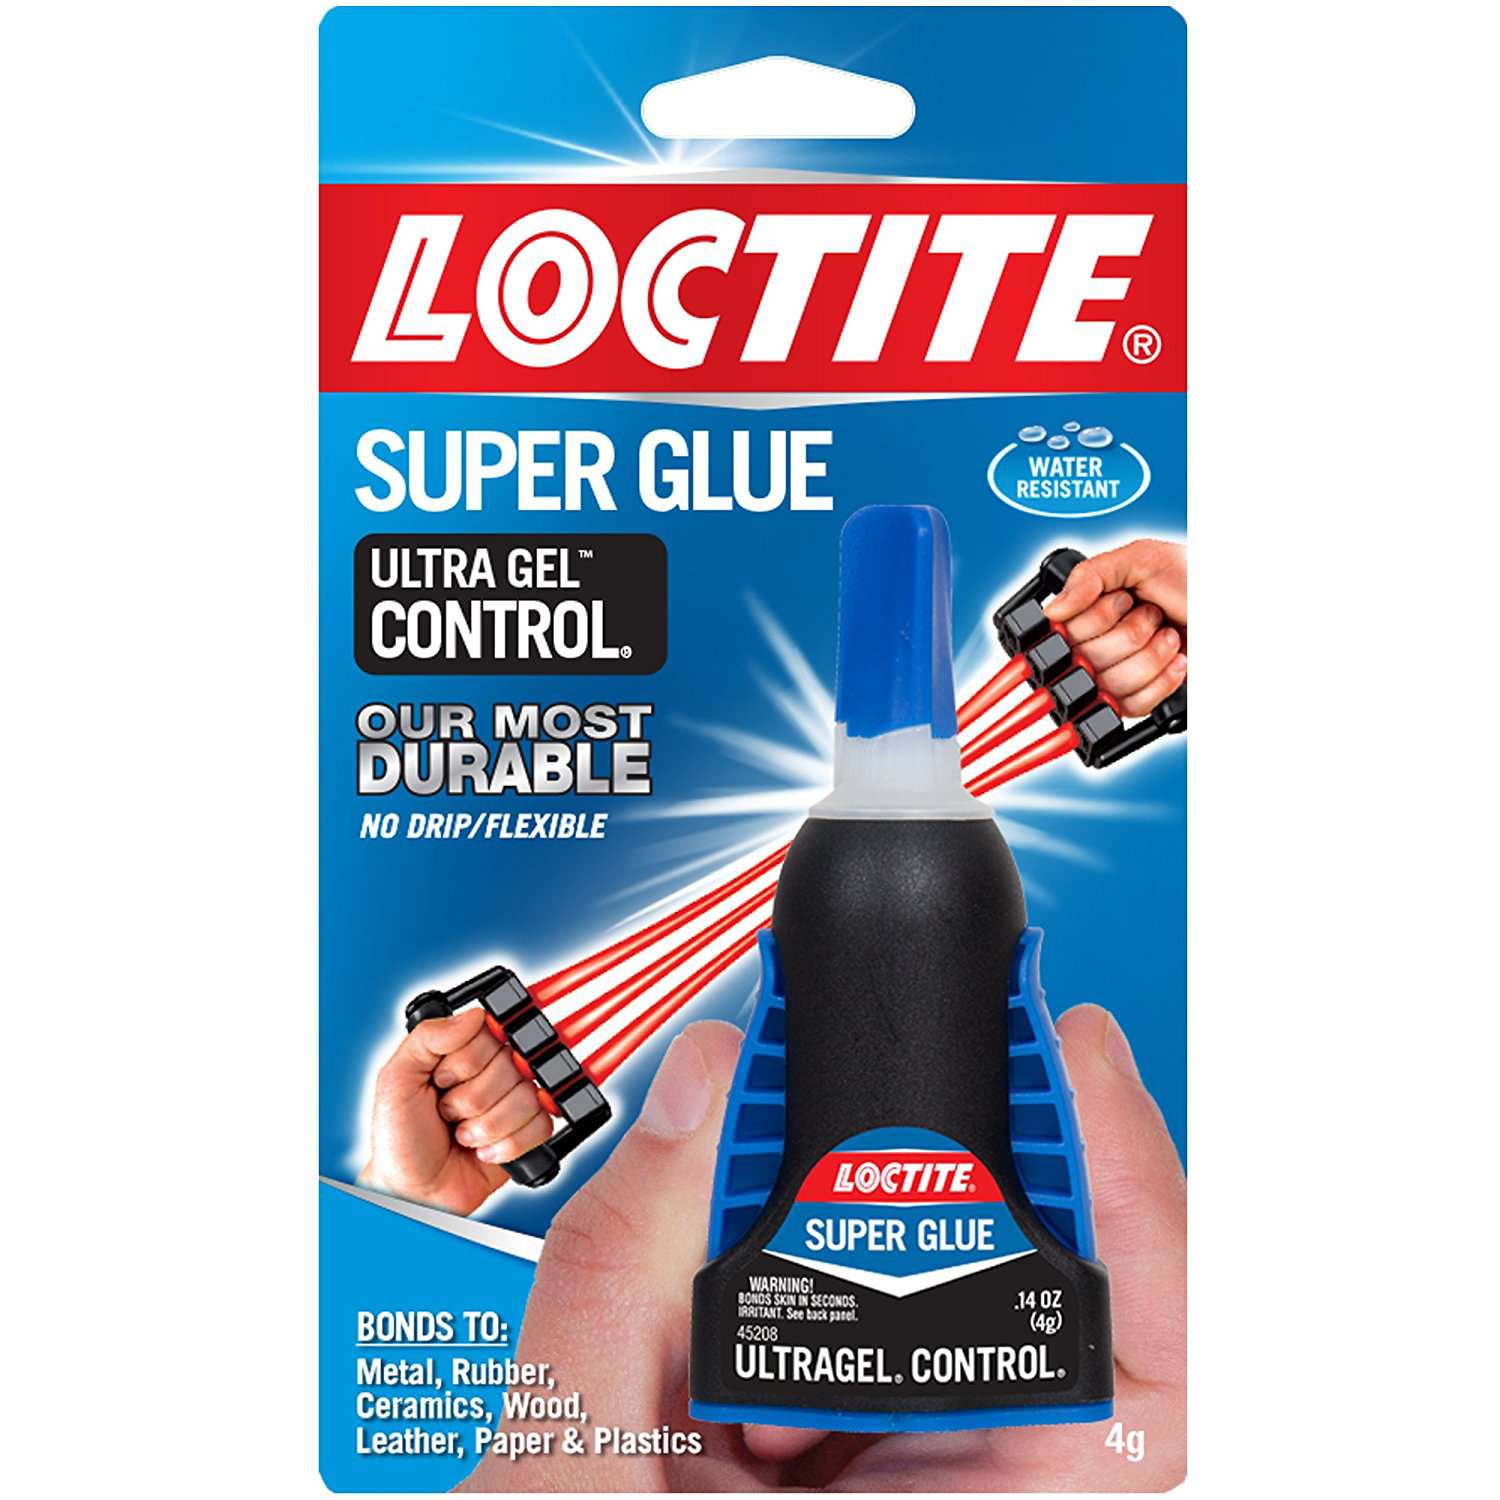 What Is The Stickiest Glue In The World